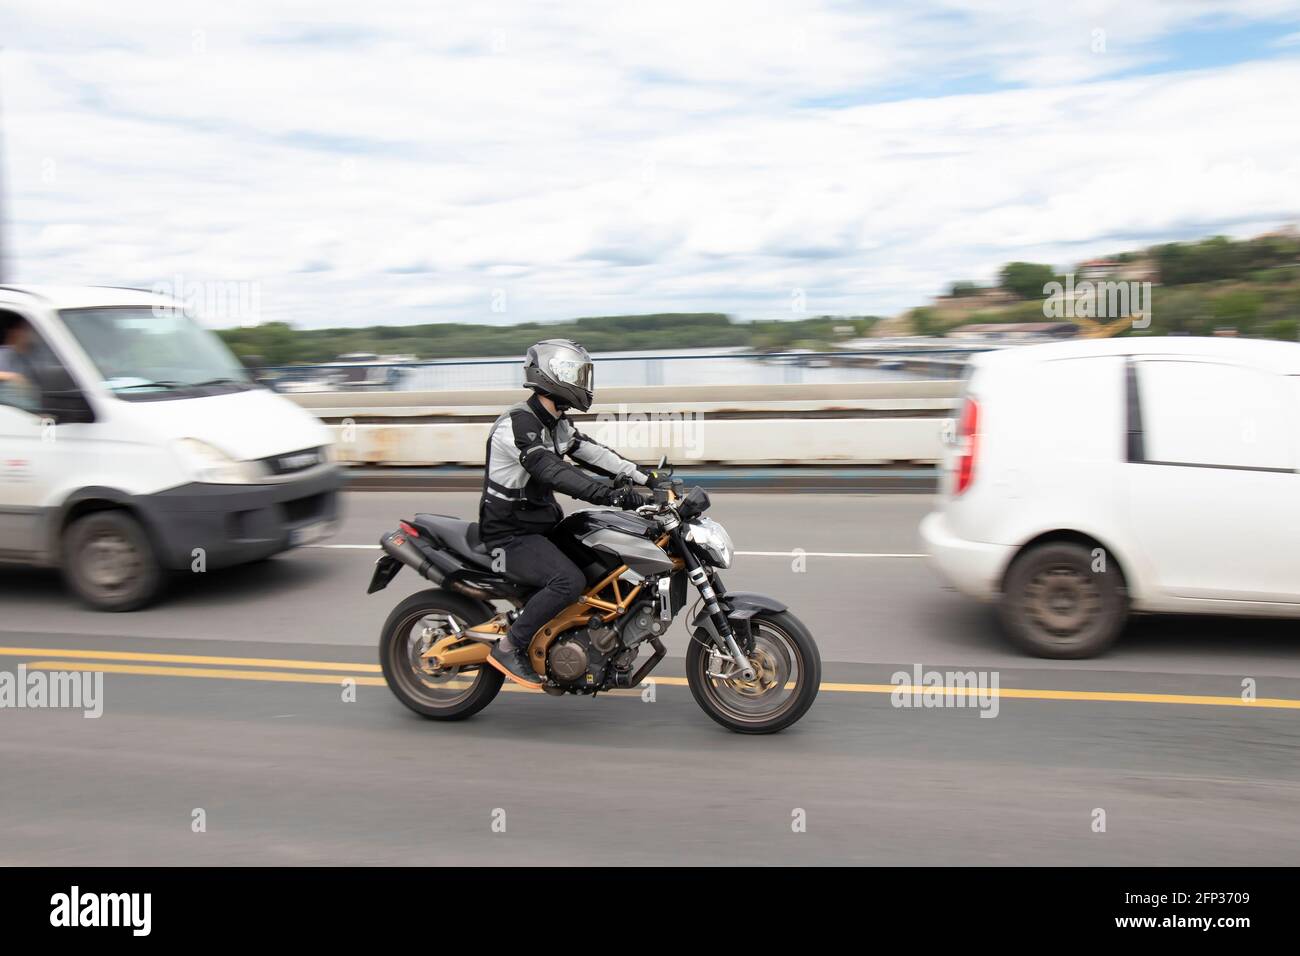 Belgrade, Serbia - May 14, 2021: One man riding a motorbike in traffic, over the city bridge Stock Photo